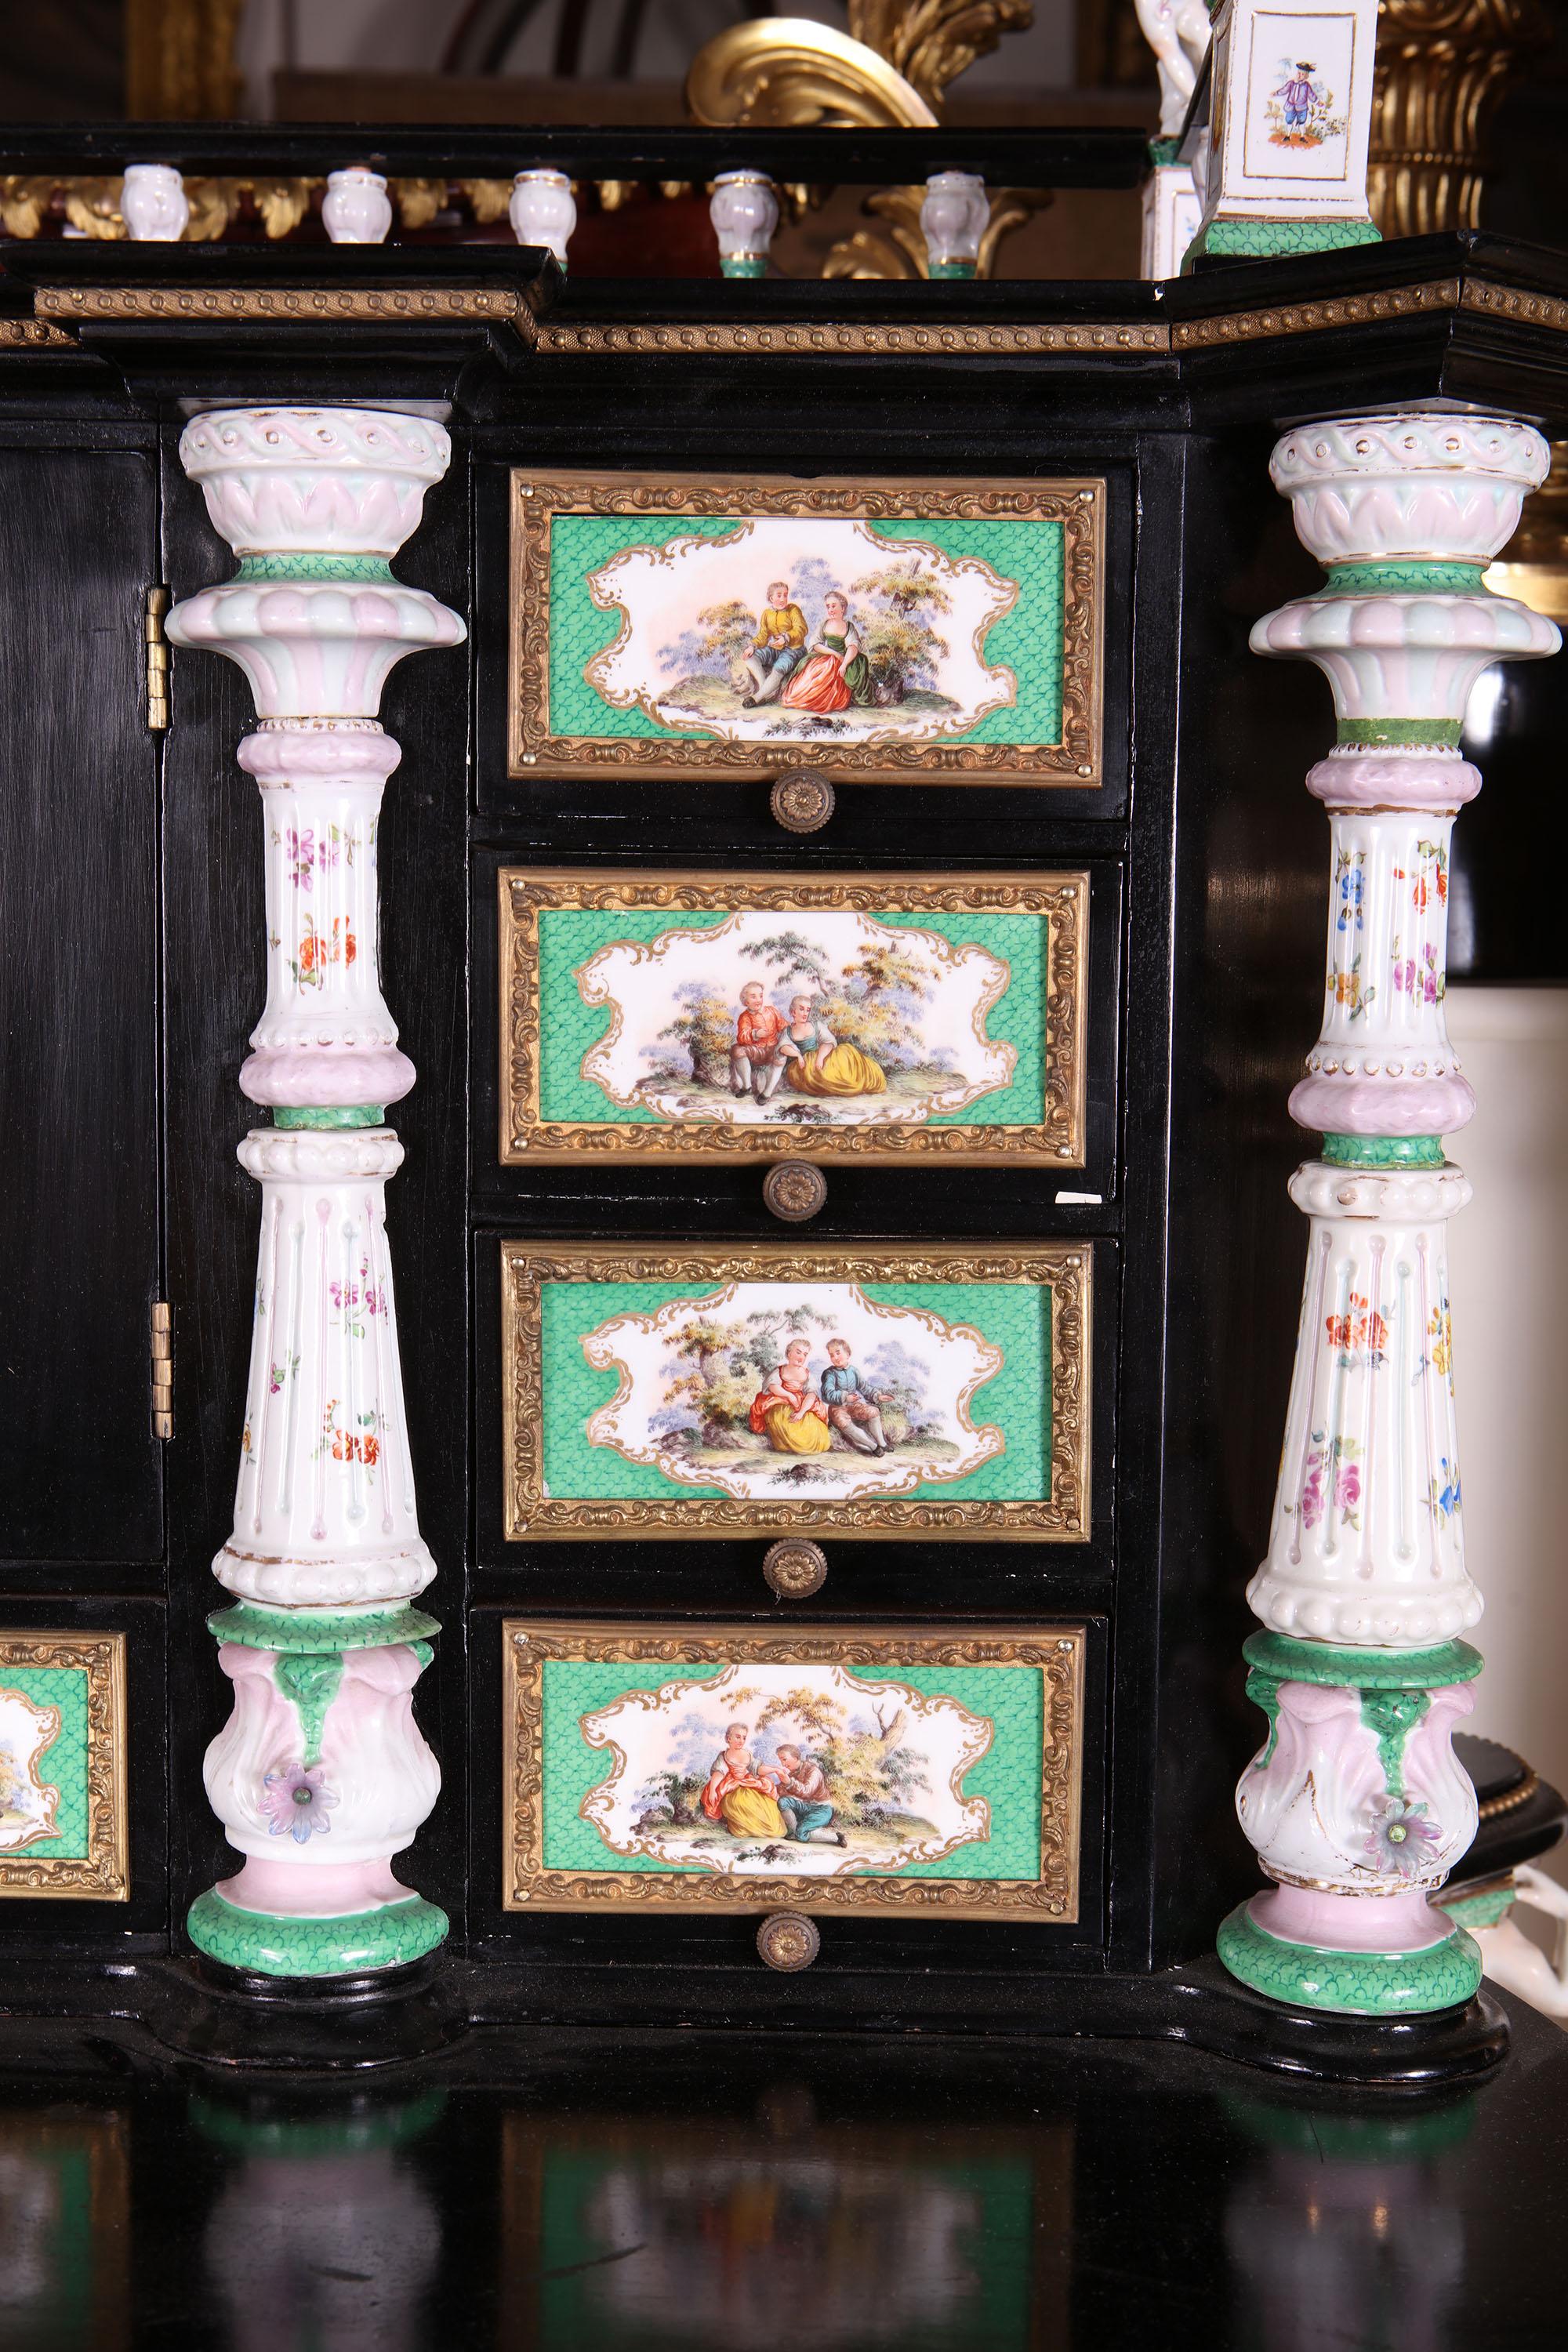 Dresden Porcelain Mounted Ebonised Bureau Cabinet In Good Condition For Sale In London, by appointment only